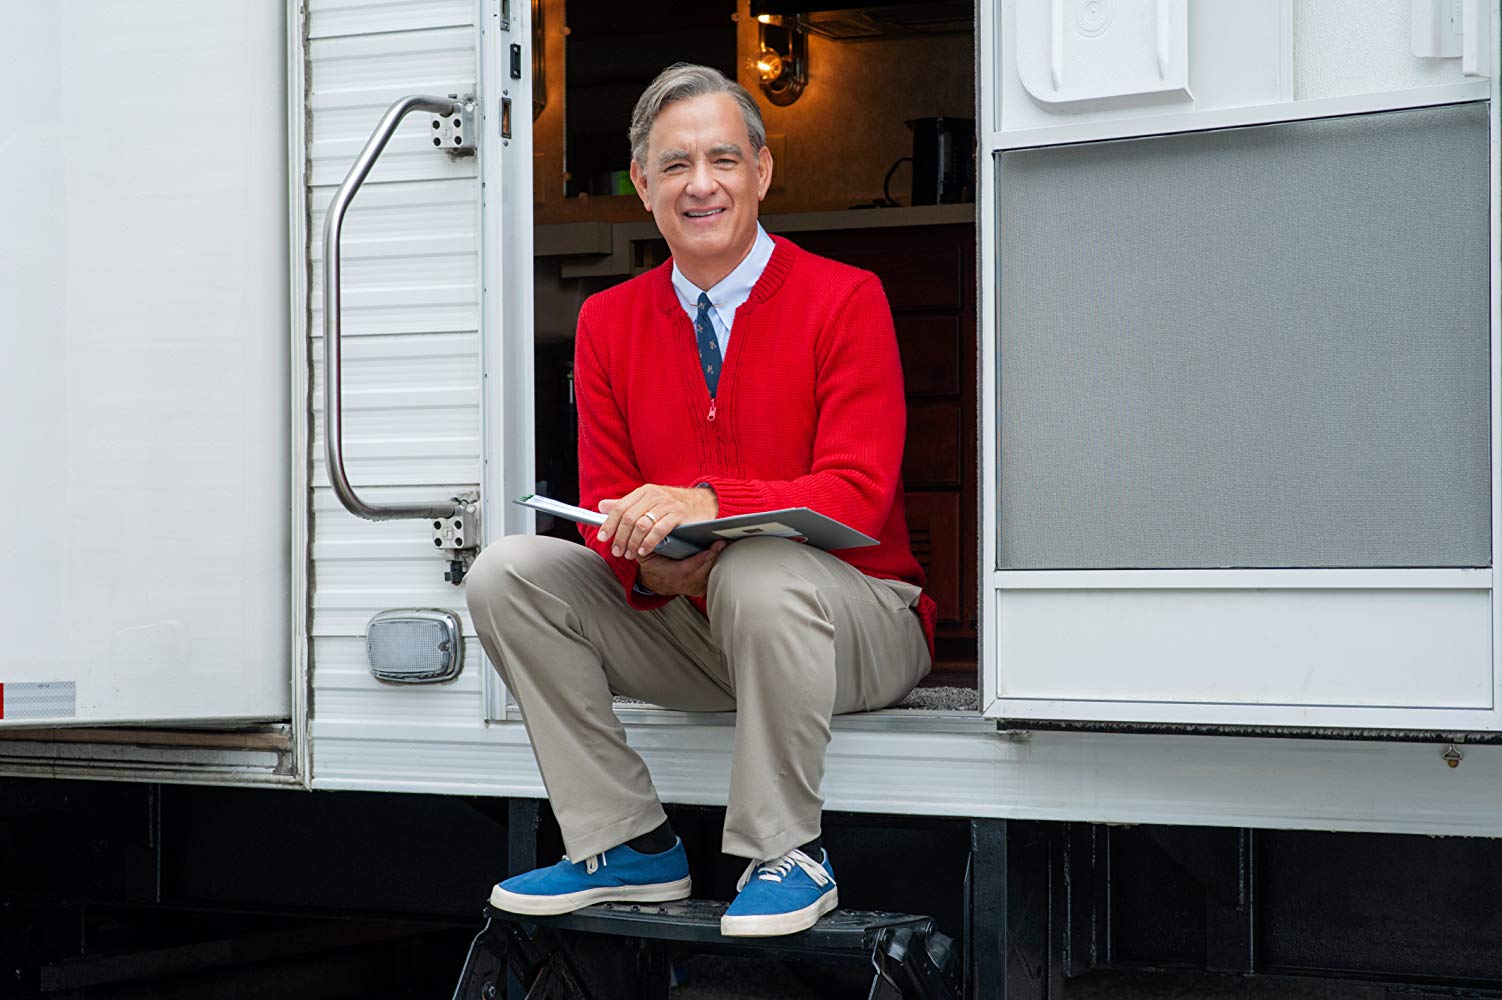 this photo shows Tom Hanks in the role of the real Mister Rogers